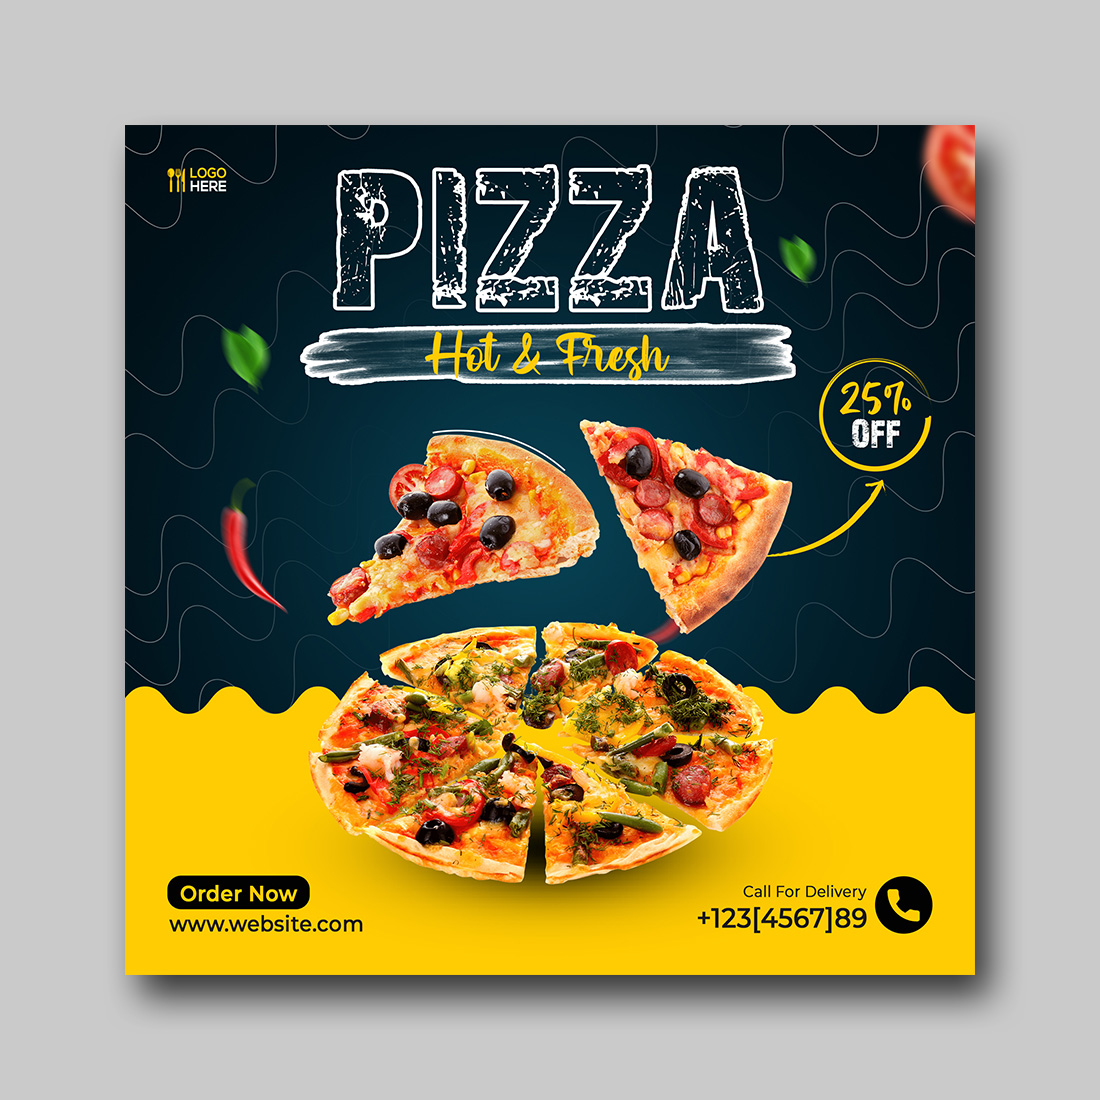 Food Instagram PSD Template cover image.